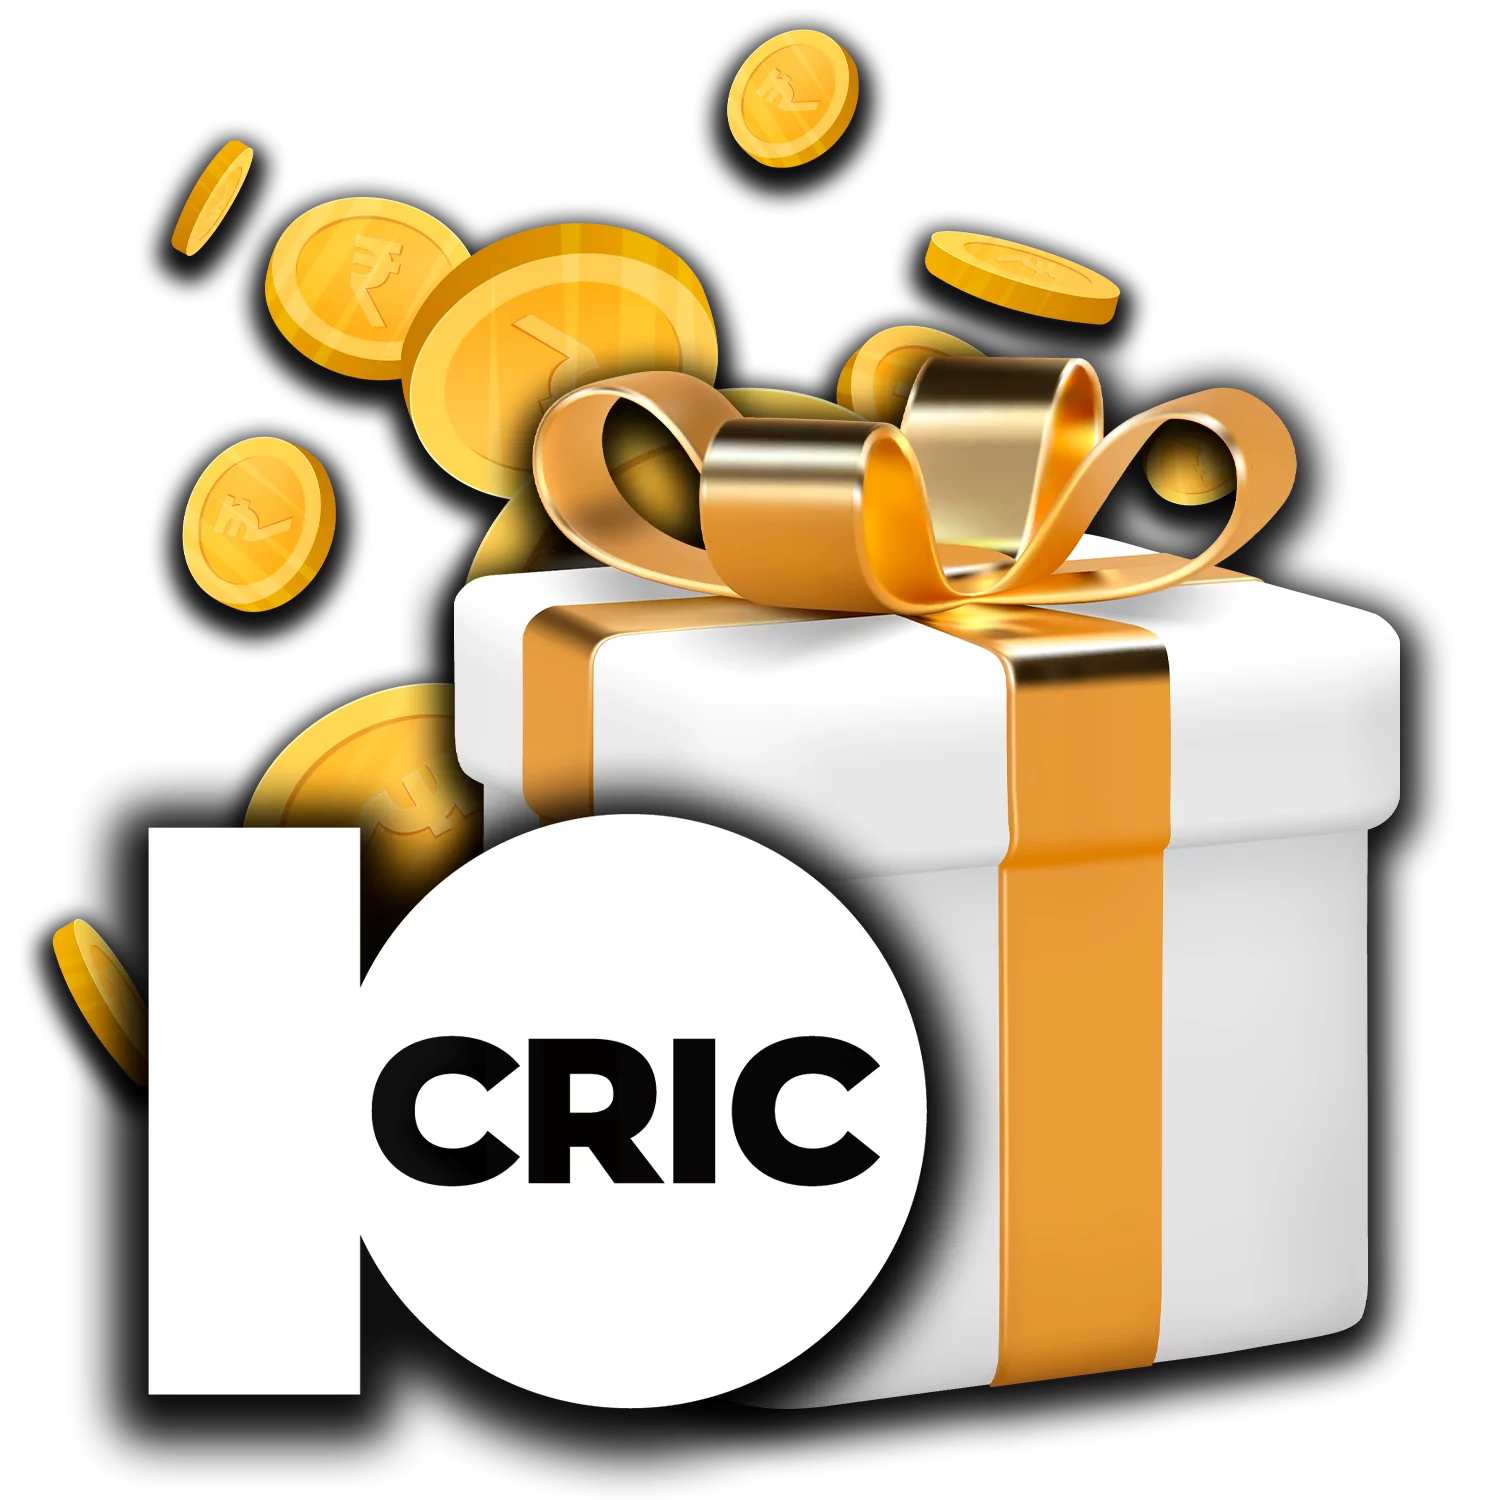 Learn how to get a bonus from 10Cric on placing bets and playing casino games.